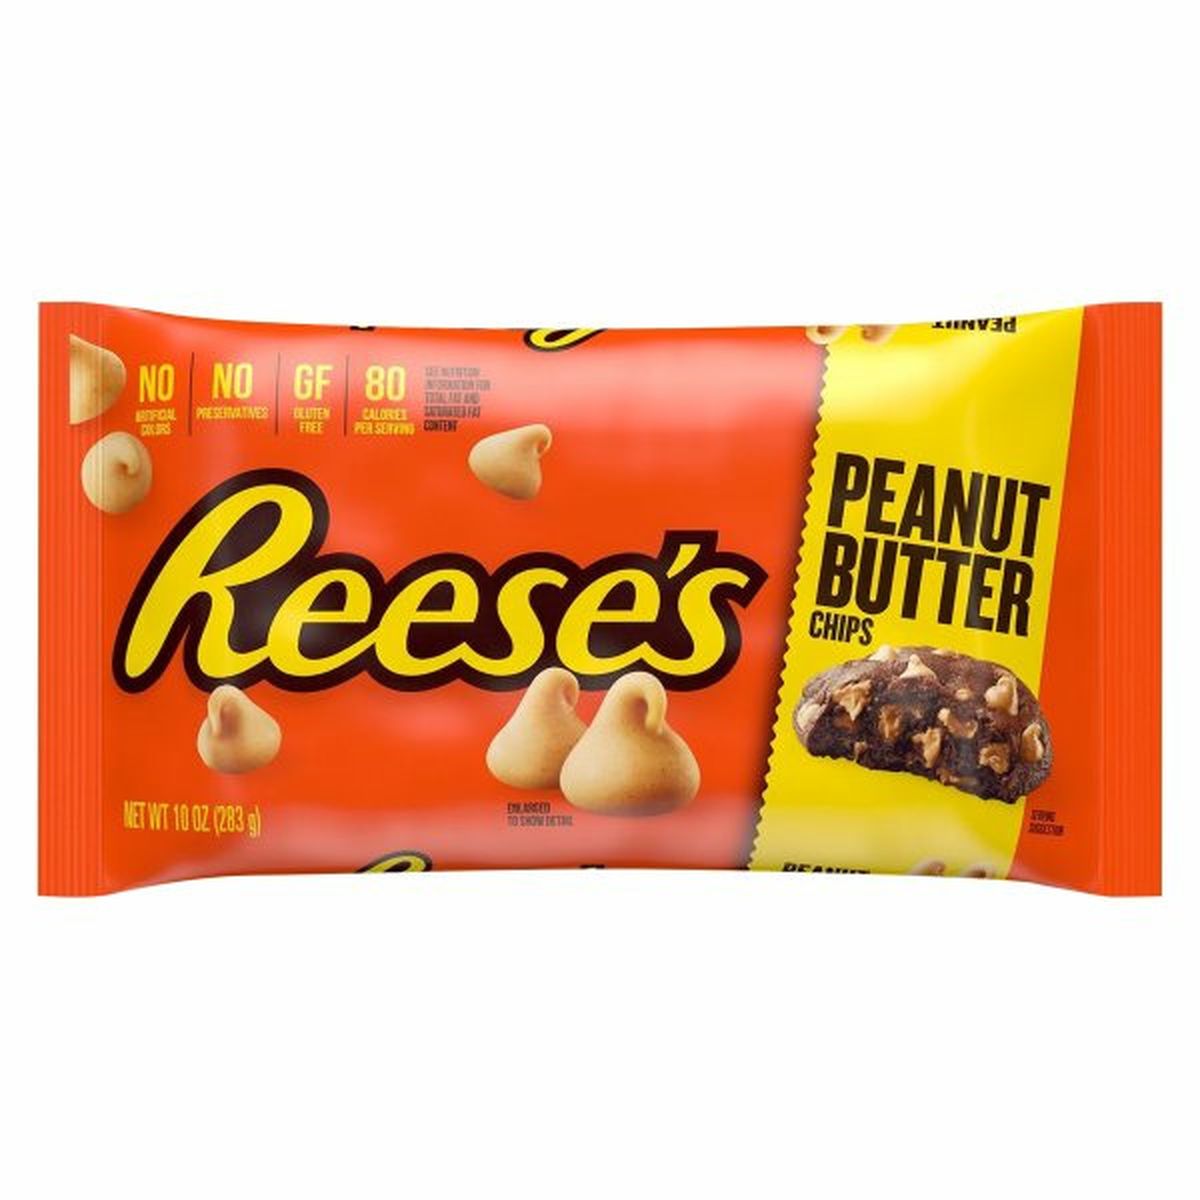 Calories in Reese's Peanut Butter Chips